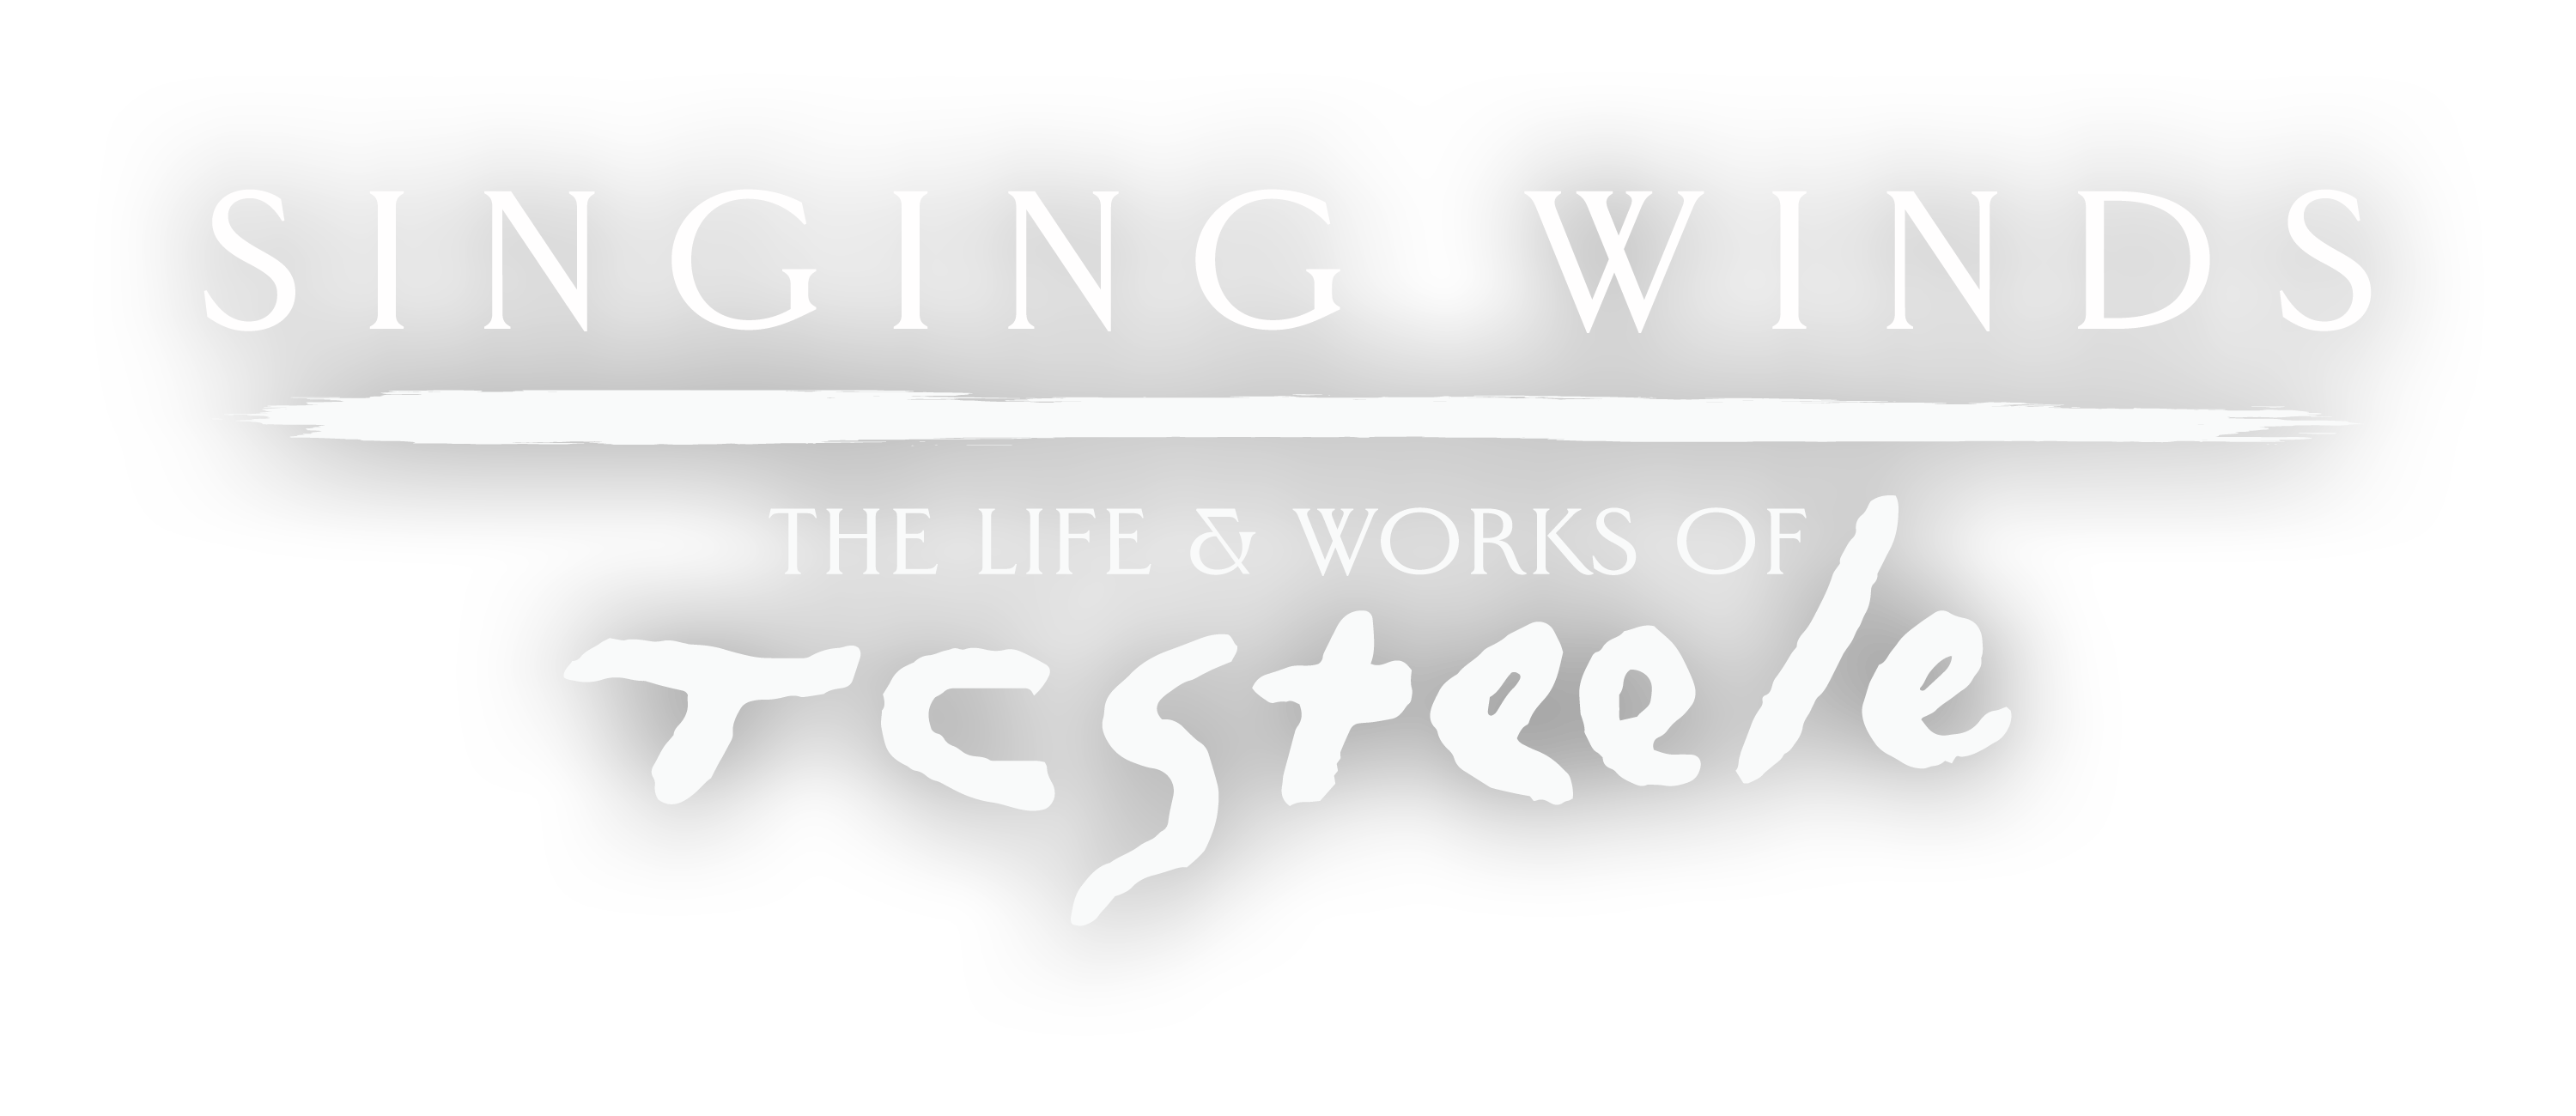 Singing Winds: The Life & Works of T.C. Steele